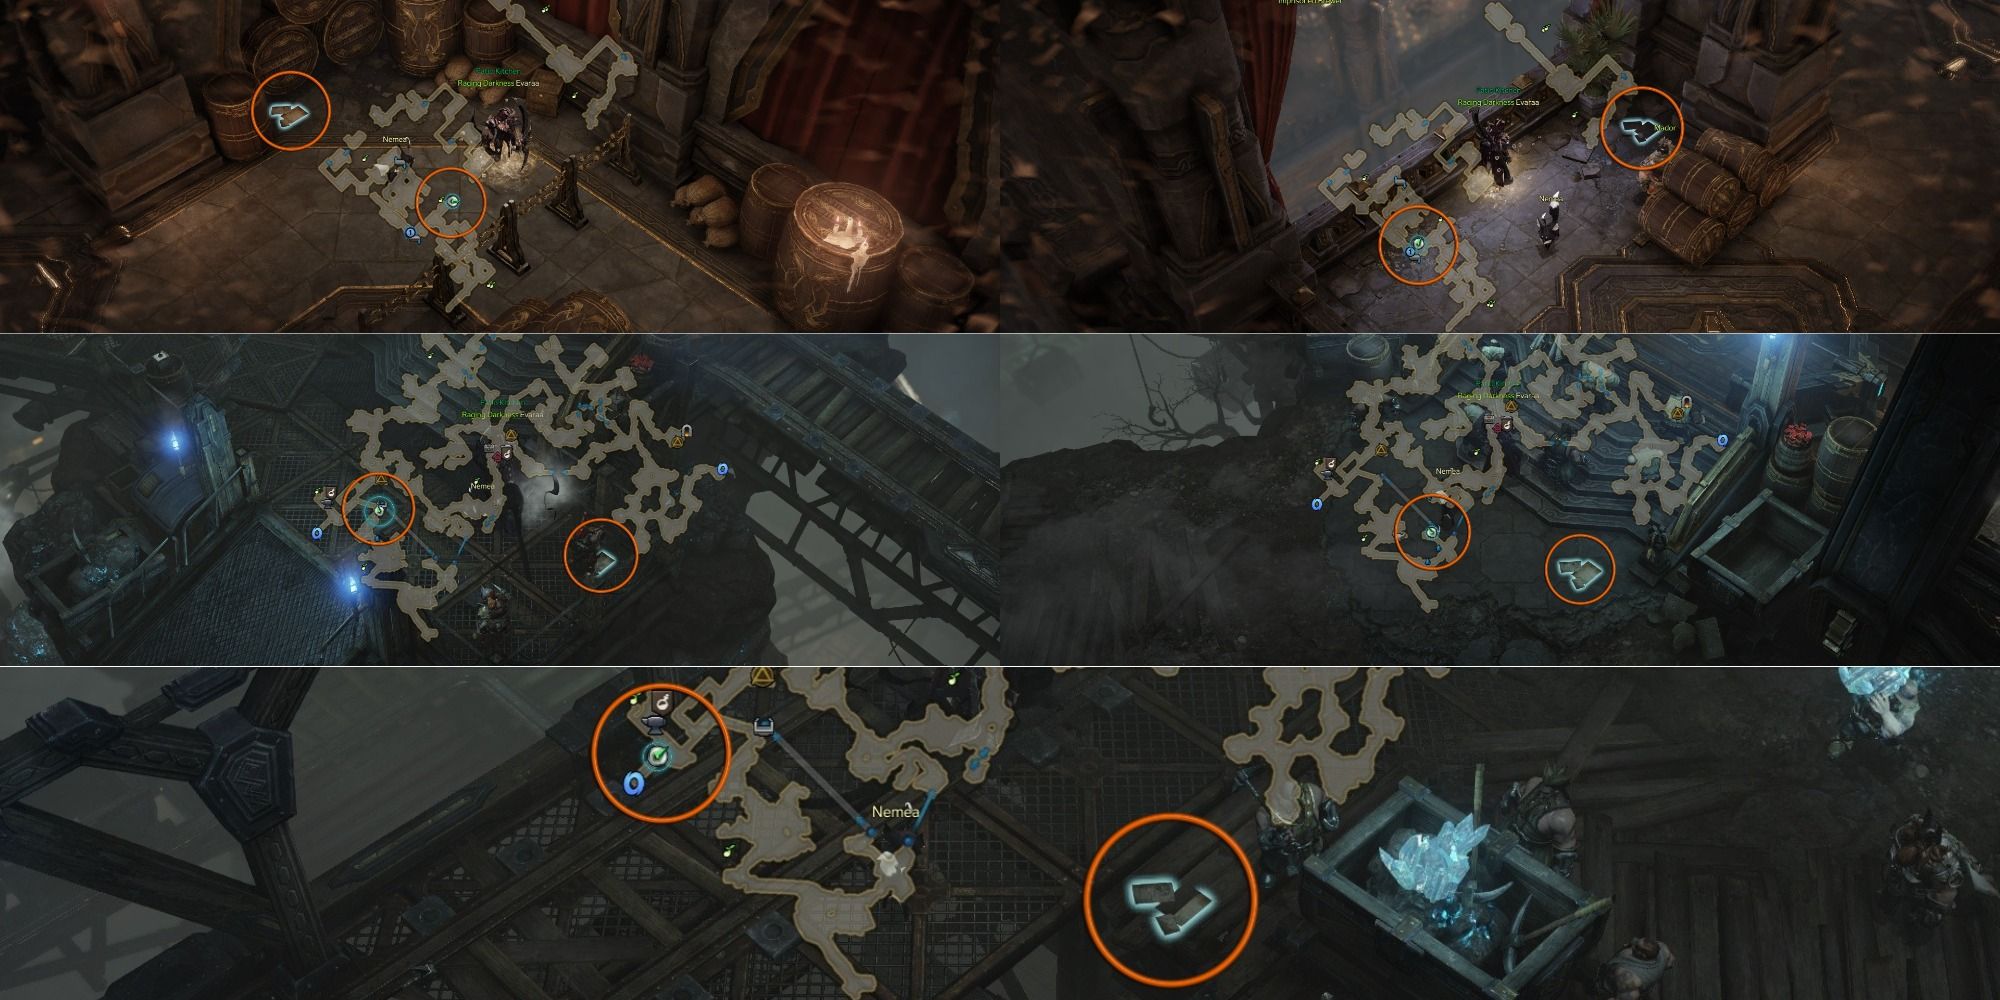 Lost Ark split image of Yorn's Hidden Story 6 locations with mini-maps open, orange circle around objects and player icons